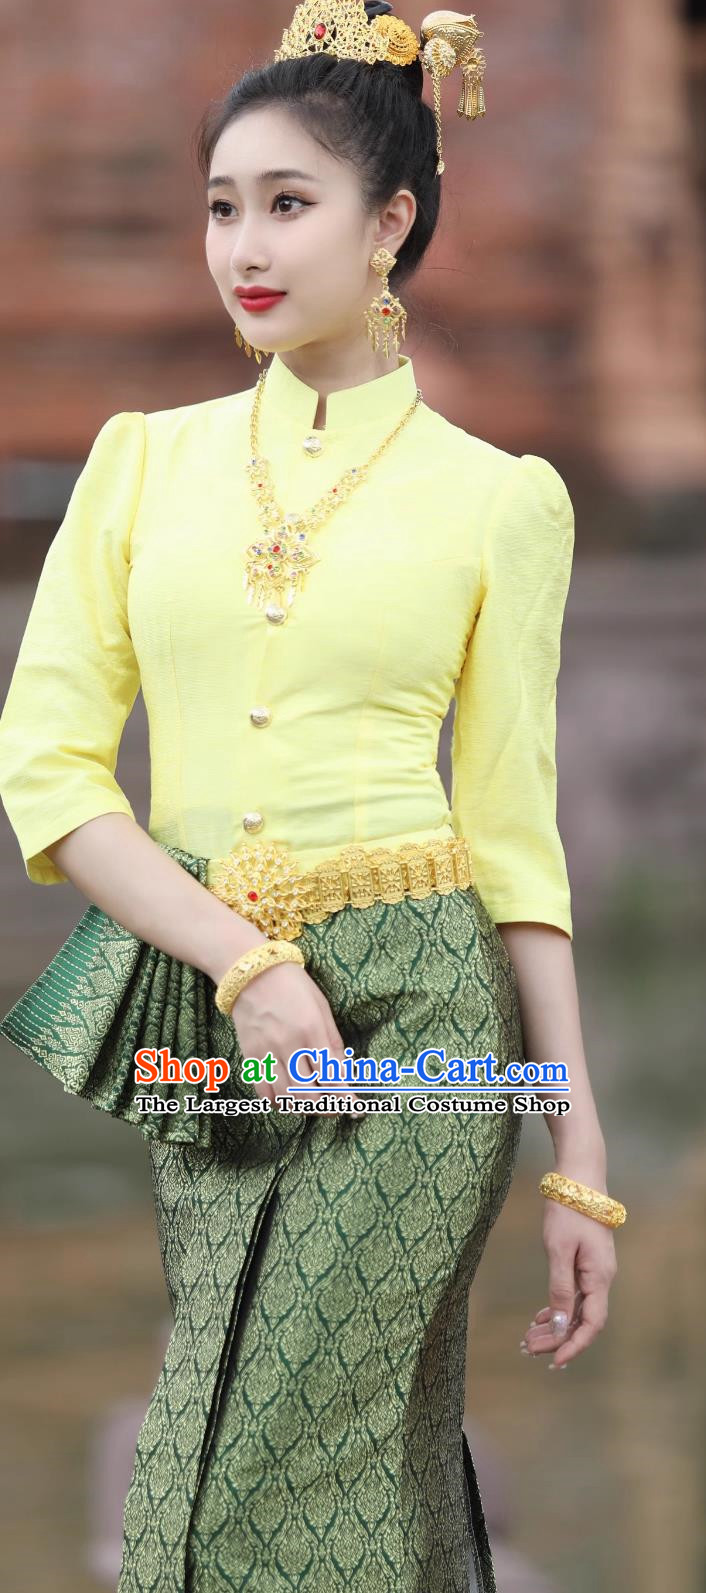 Thailand Traditional Costume Thai Women Clothing Host Bride Dress Welcome Work Dress